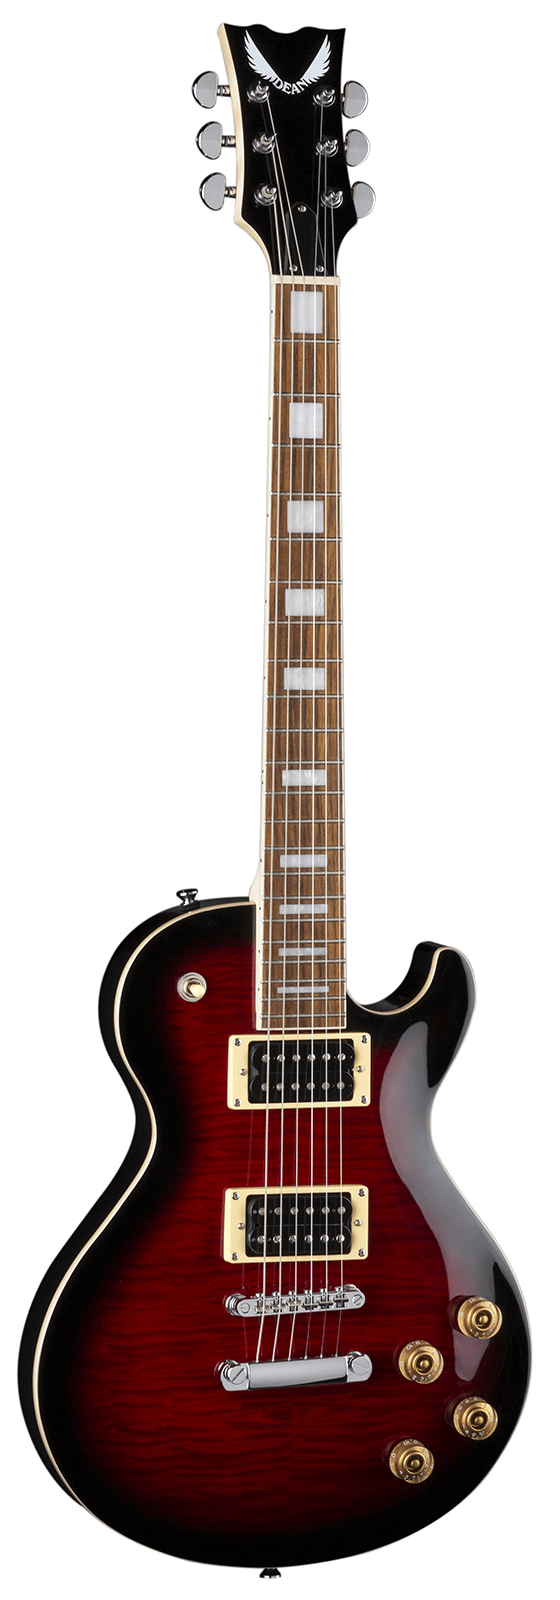 Dean Throughbred X Flame Top Electric Guitar – Trans Red